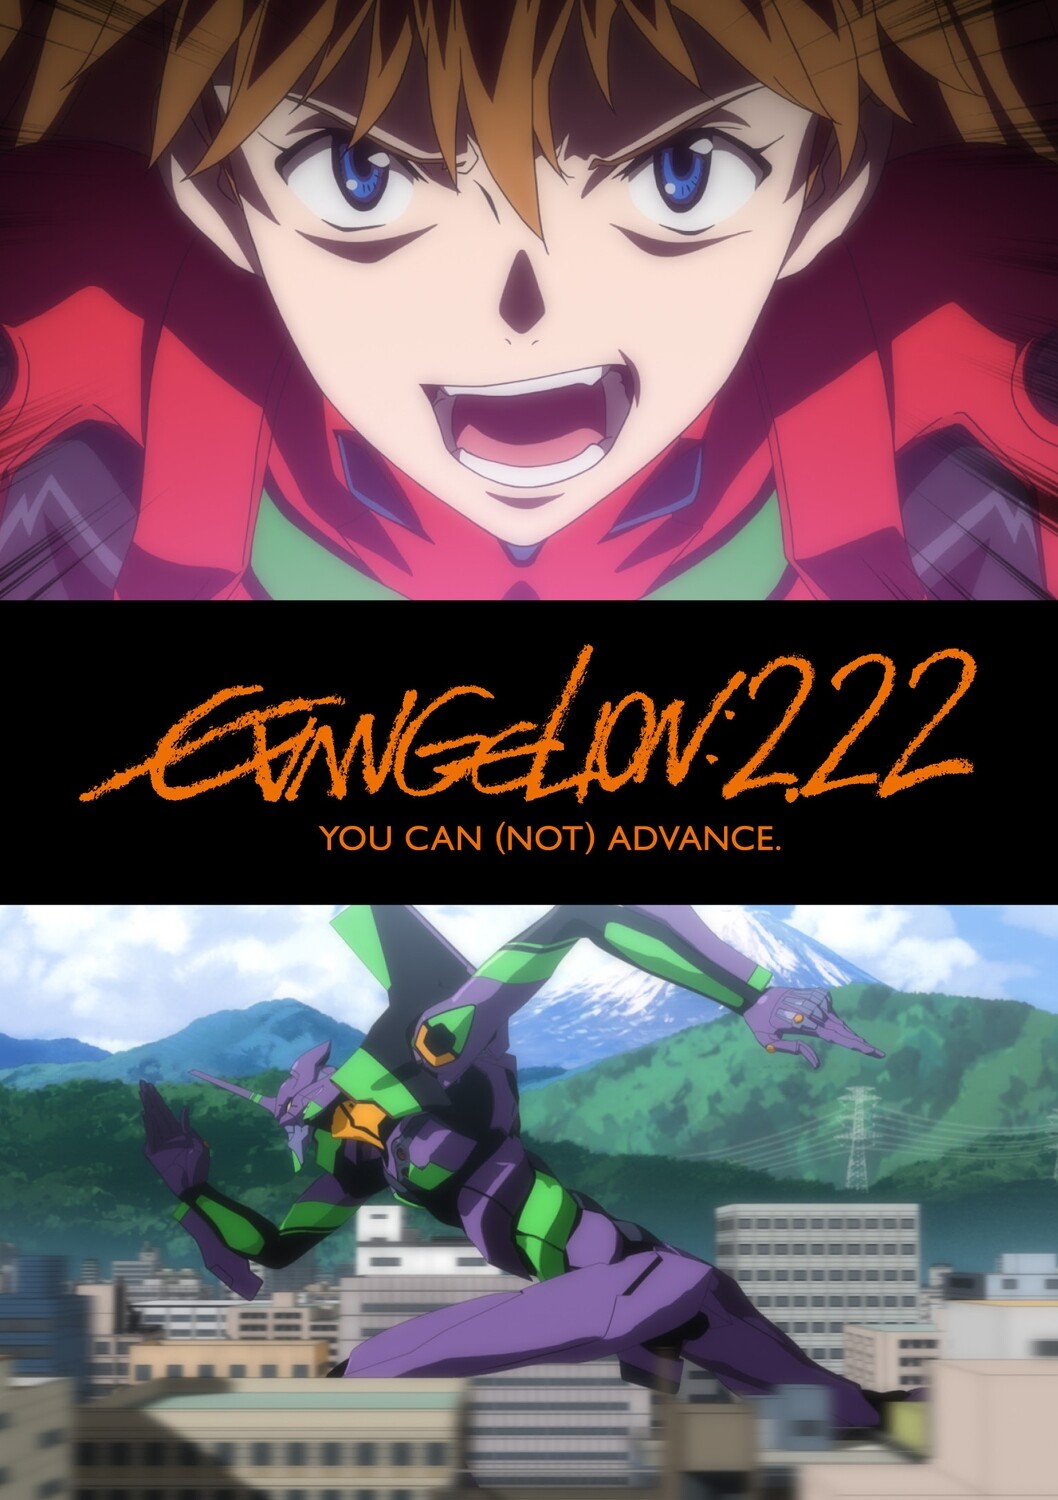 Evangelion 2.22 - You Can (Not) Advance